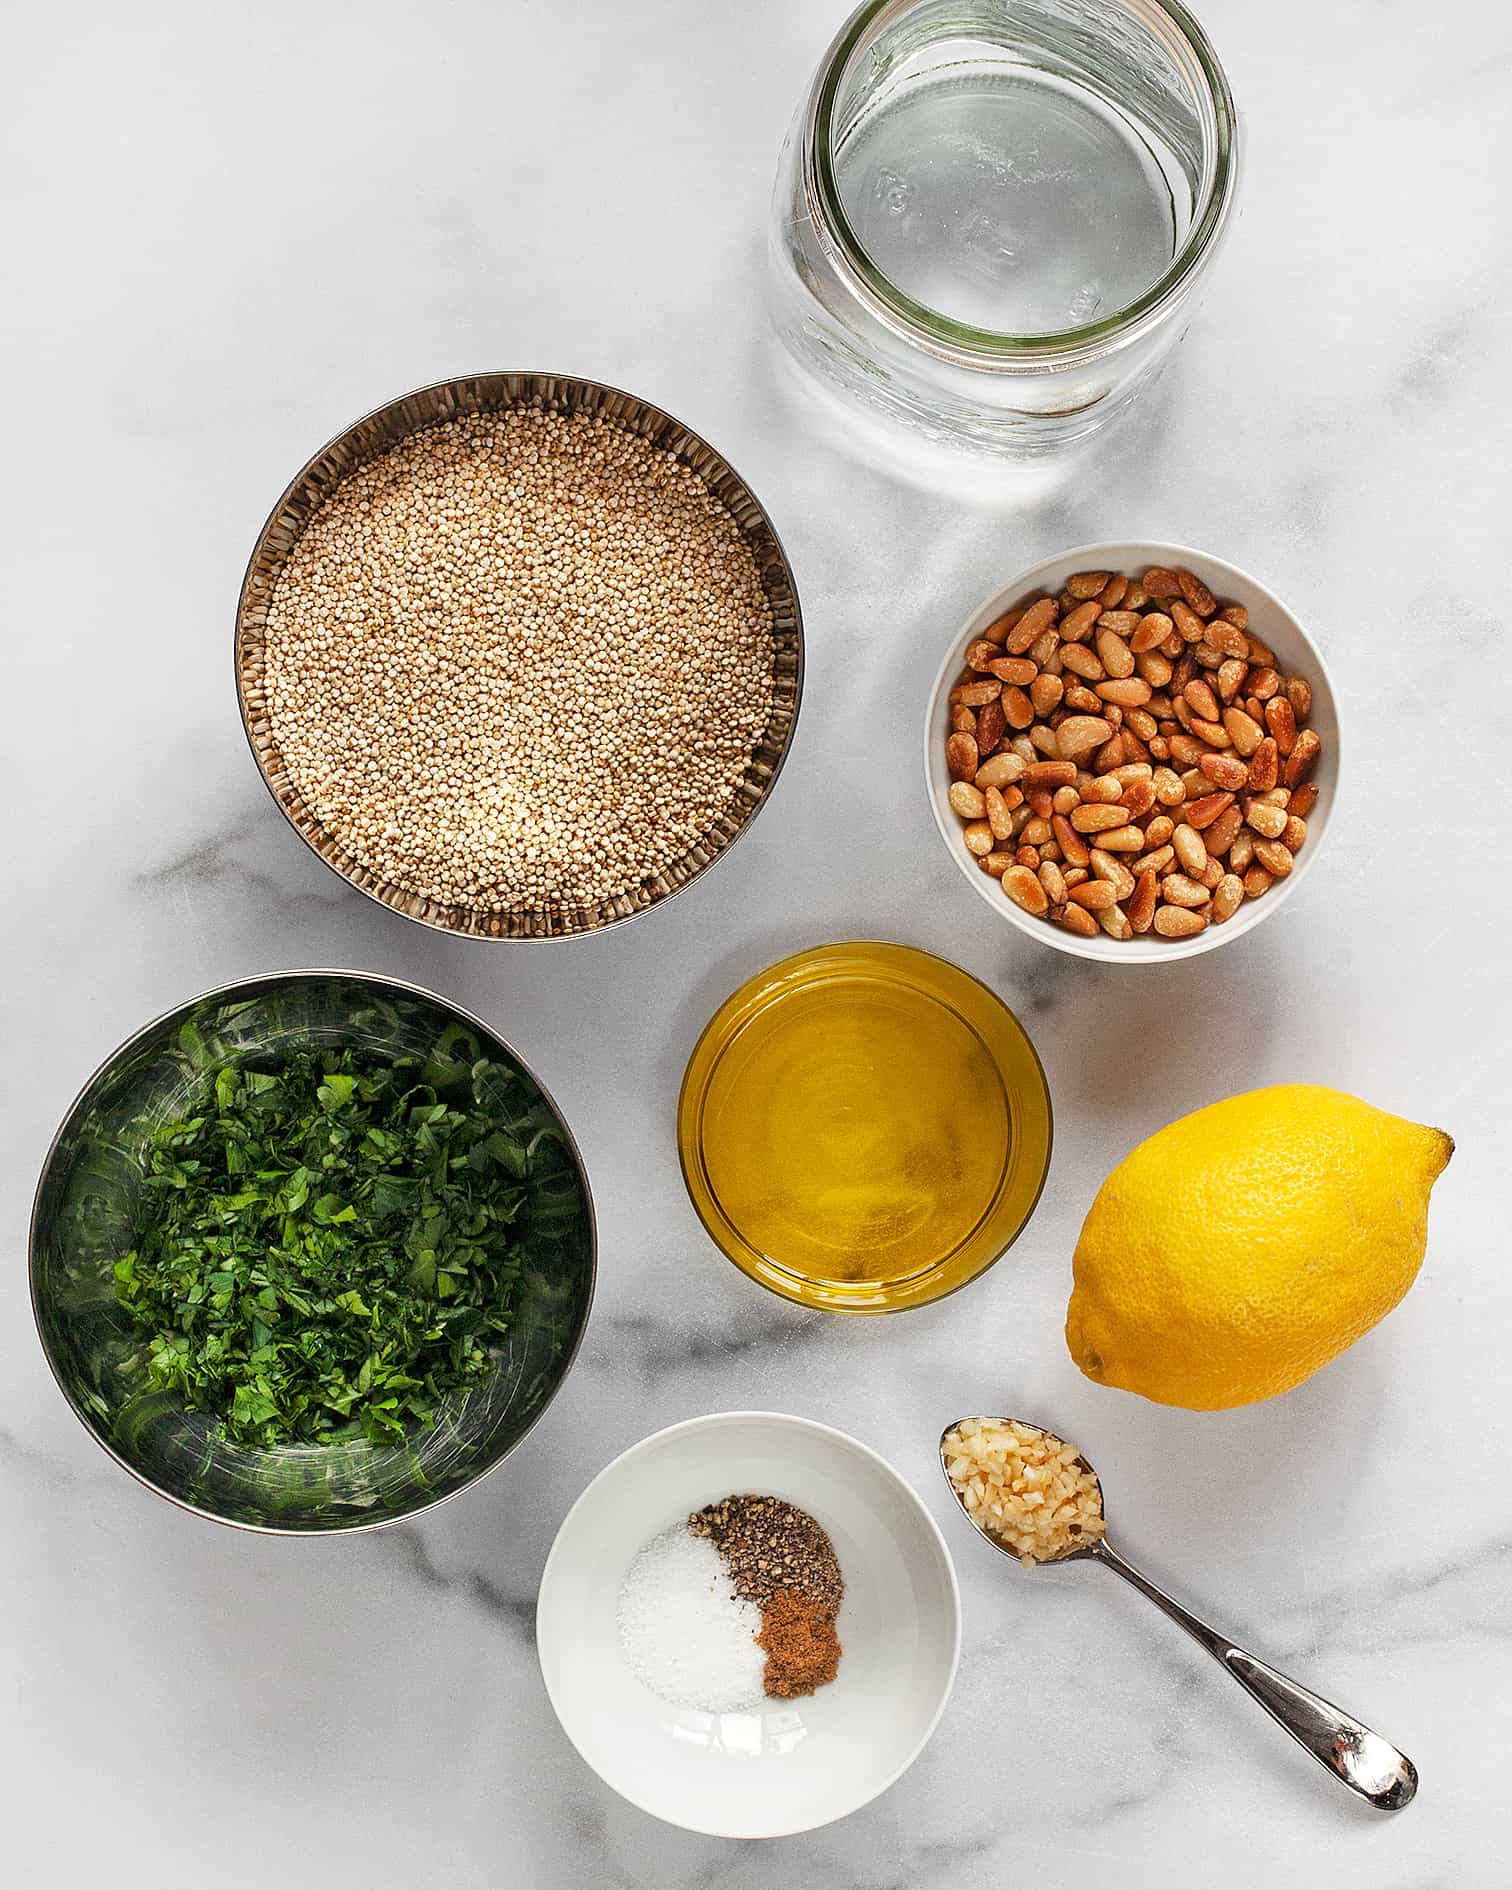 Ingredients including quinoa, lemon, parsley, pine nuts, garlic and spices.